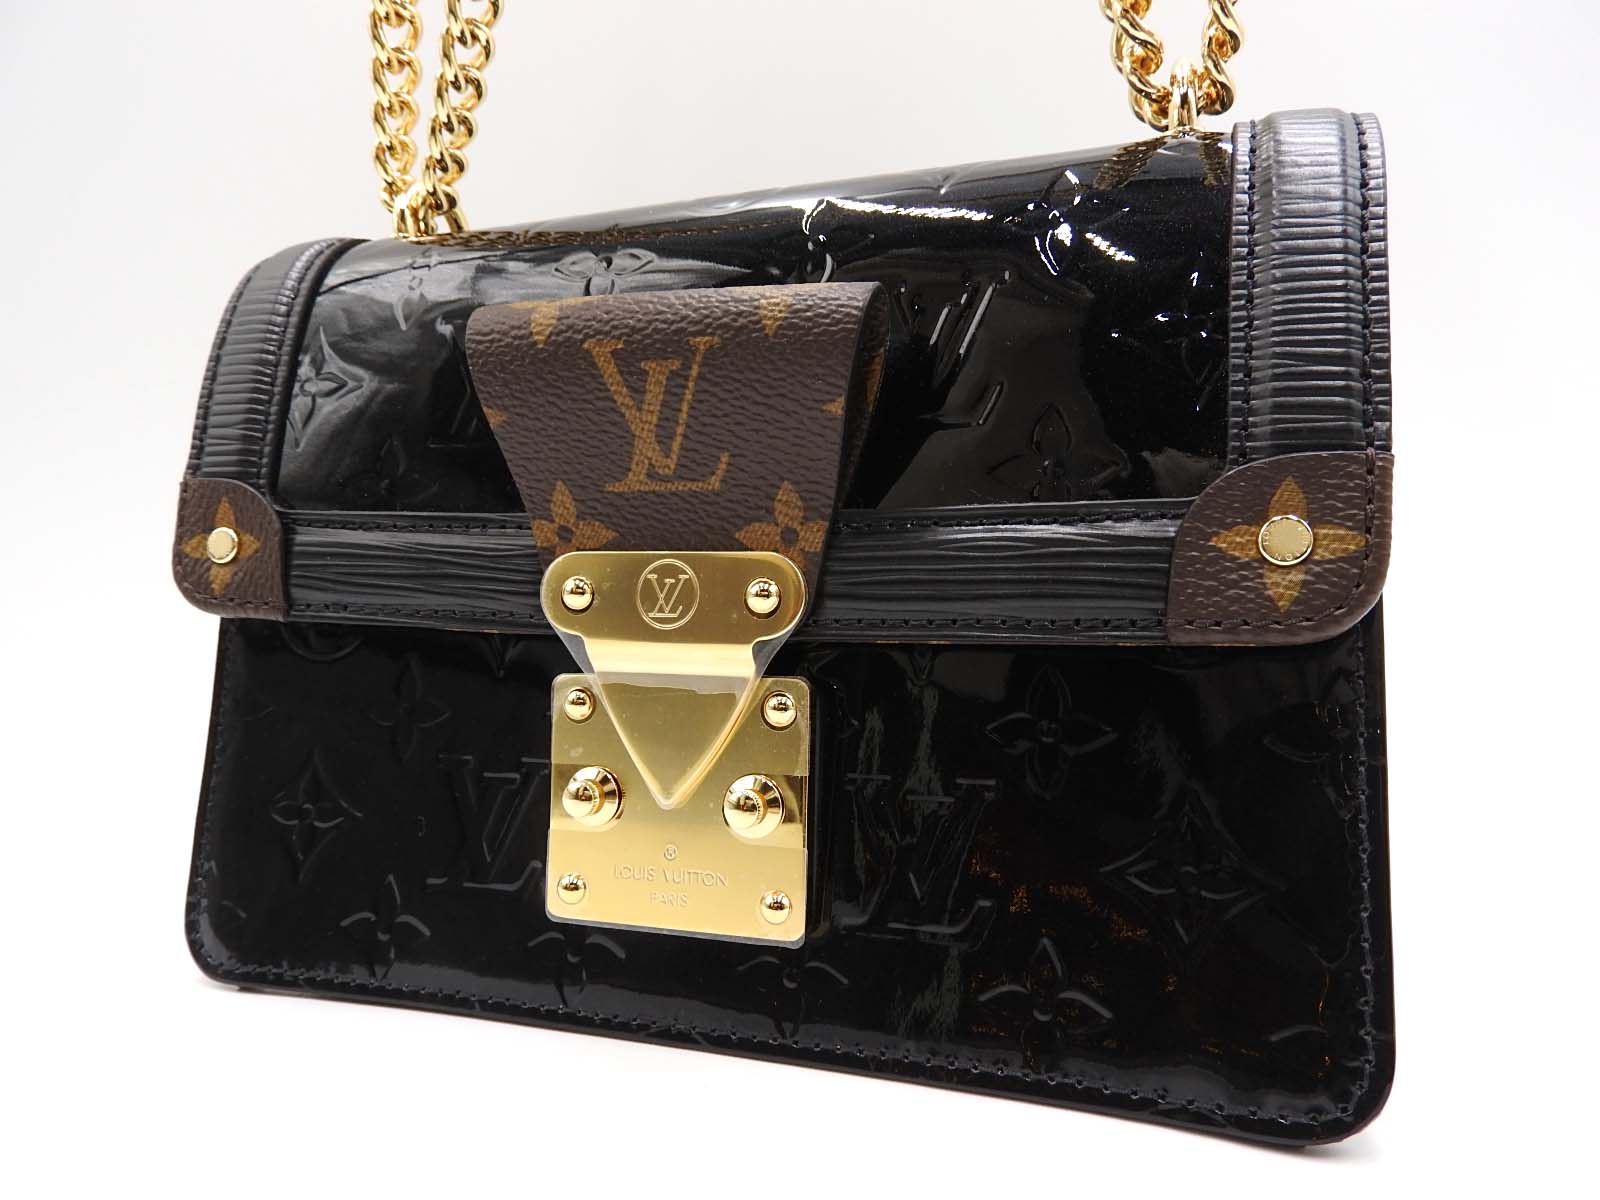 LV Wynwood: combines the - Dina Shopc Style from Australia